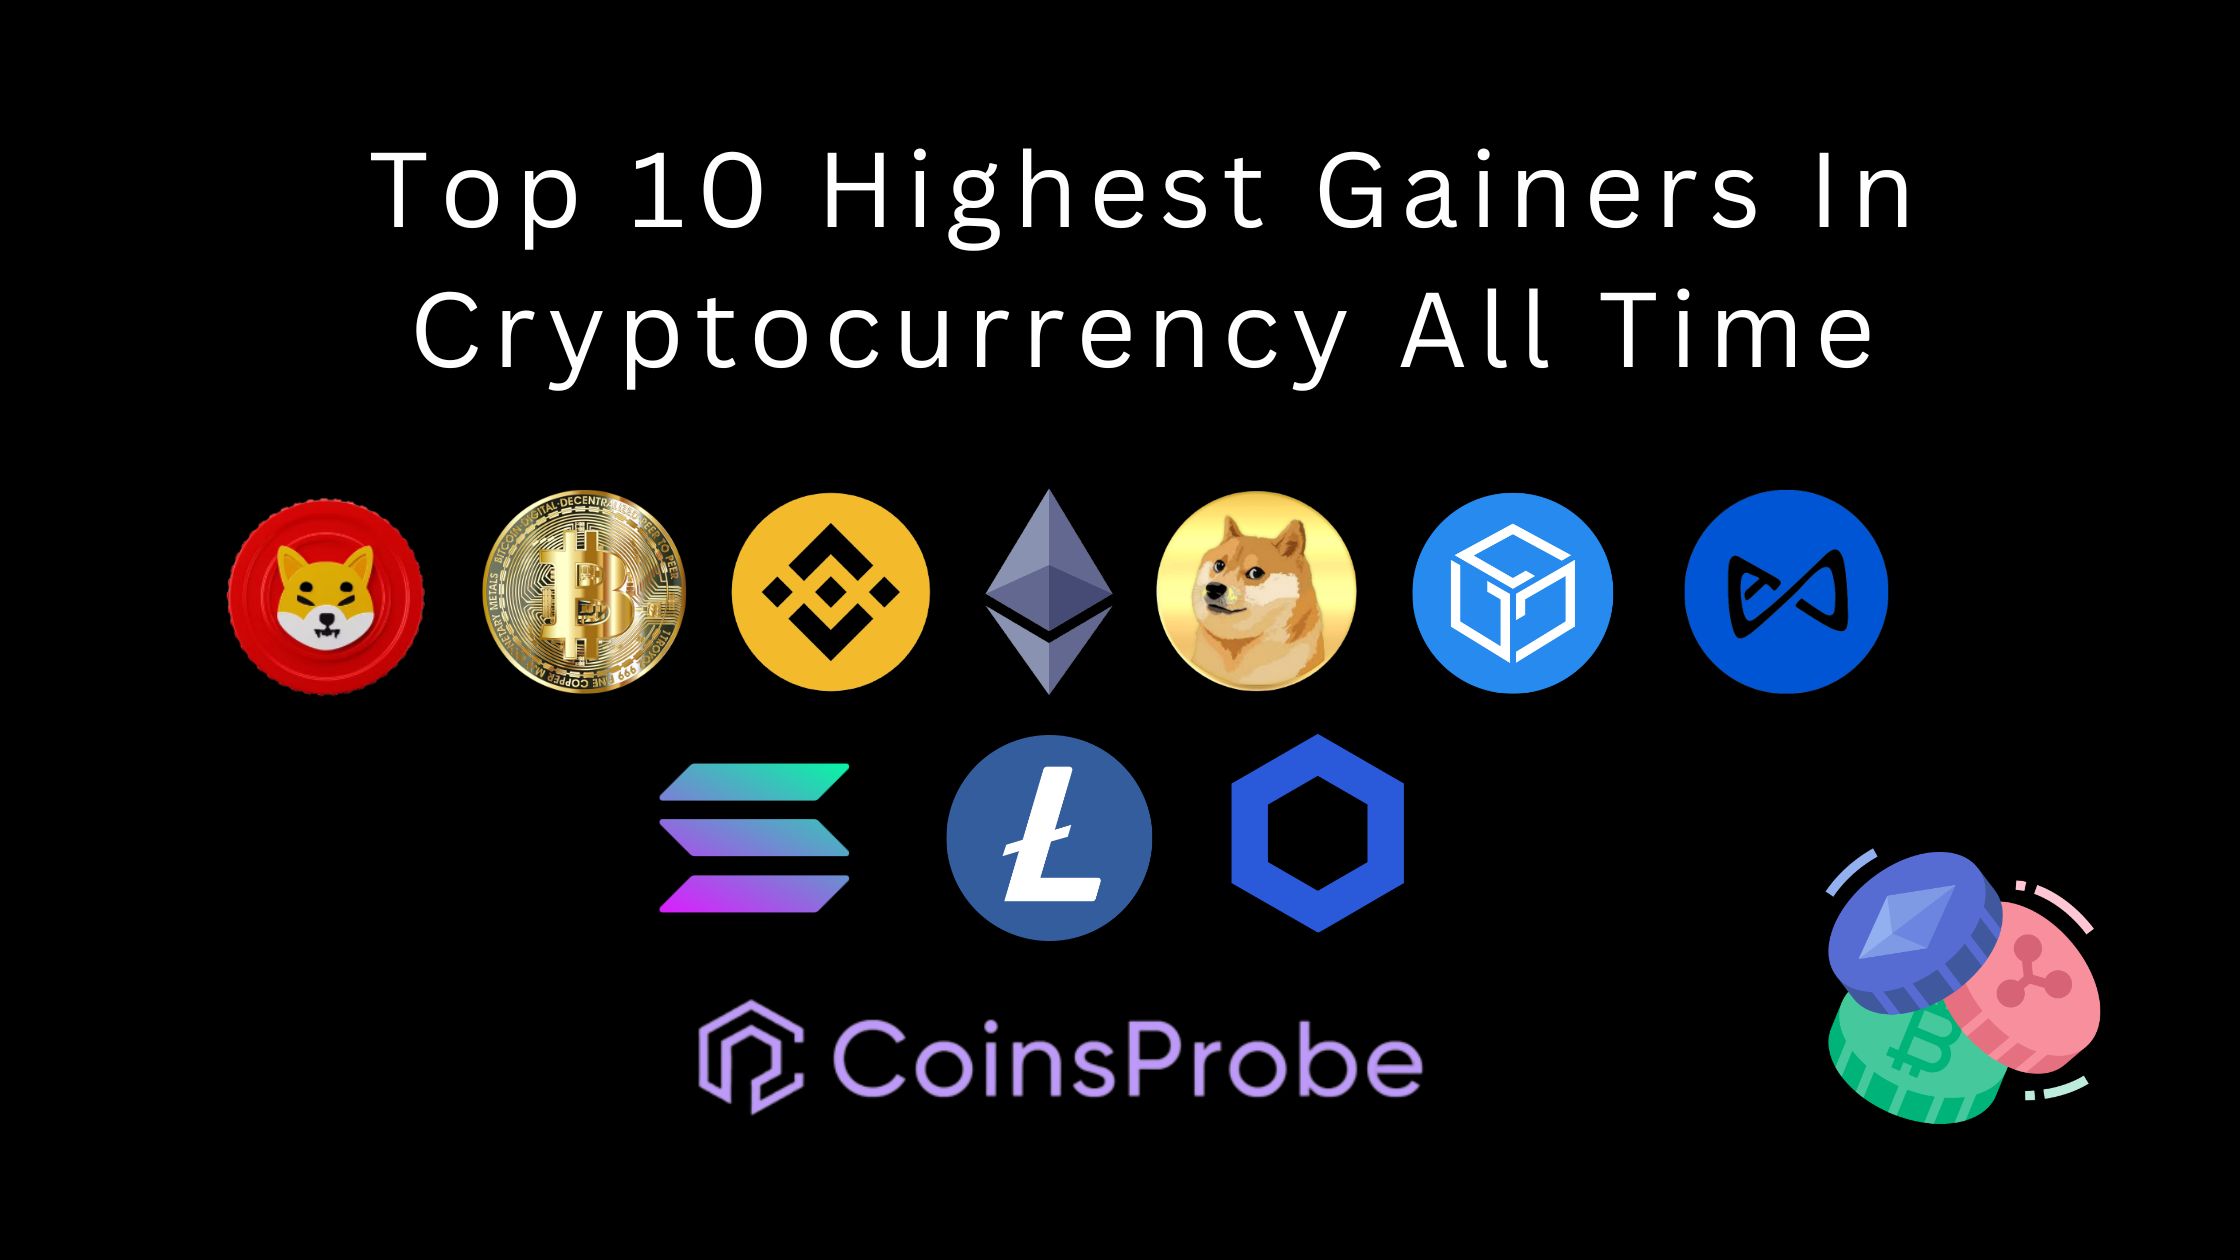 Top 10 highest gainers in cryptocurrency all time